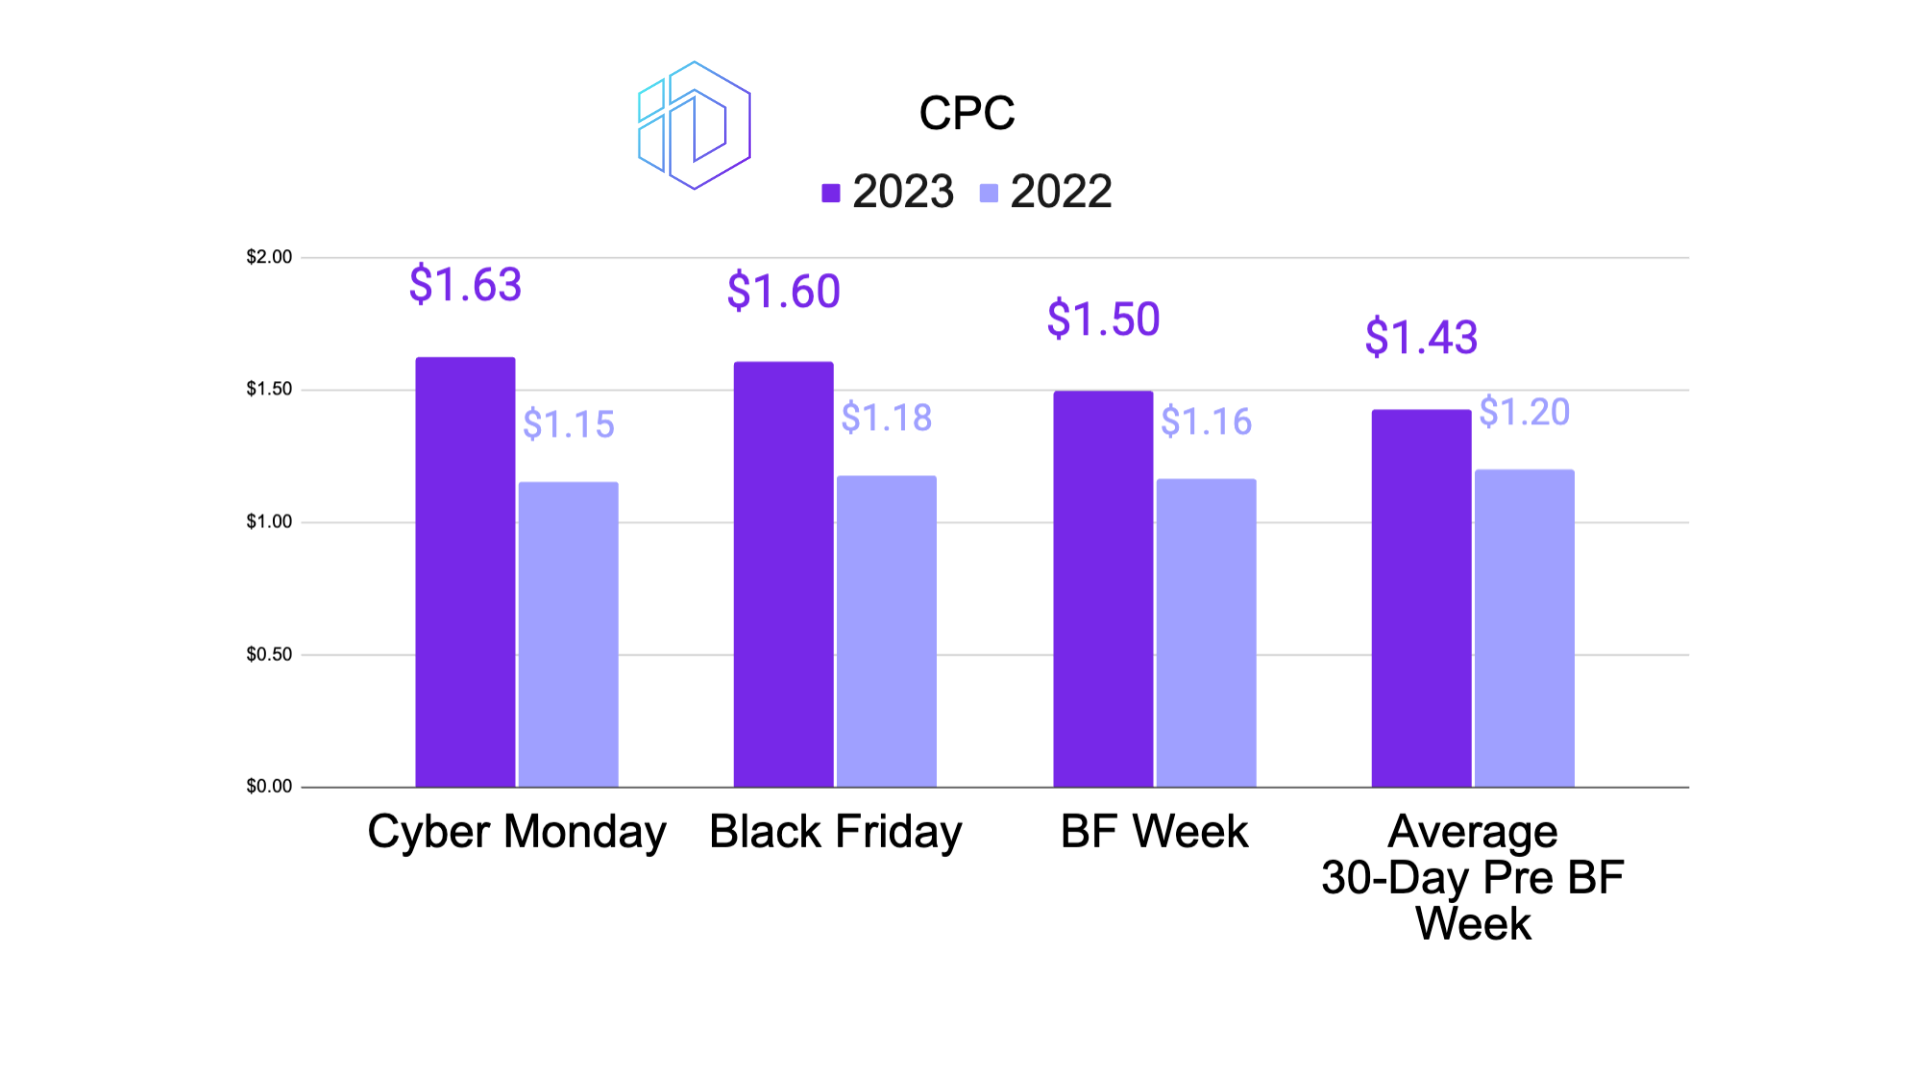 Line graph showing the year-over-year change in Cost Per Click (CPC) for Cyber Monday, Black Friday, BF Week, and the Average 30-Day Pre BF Week. The graph illustrates a consistent increase in CPC across these events from 2022 to 2023, with the most significant rises observed on Cyber Monday and Black Friday, indicating higher advertising costs during peak shopping periods.